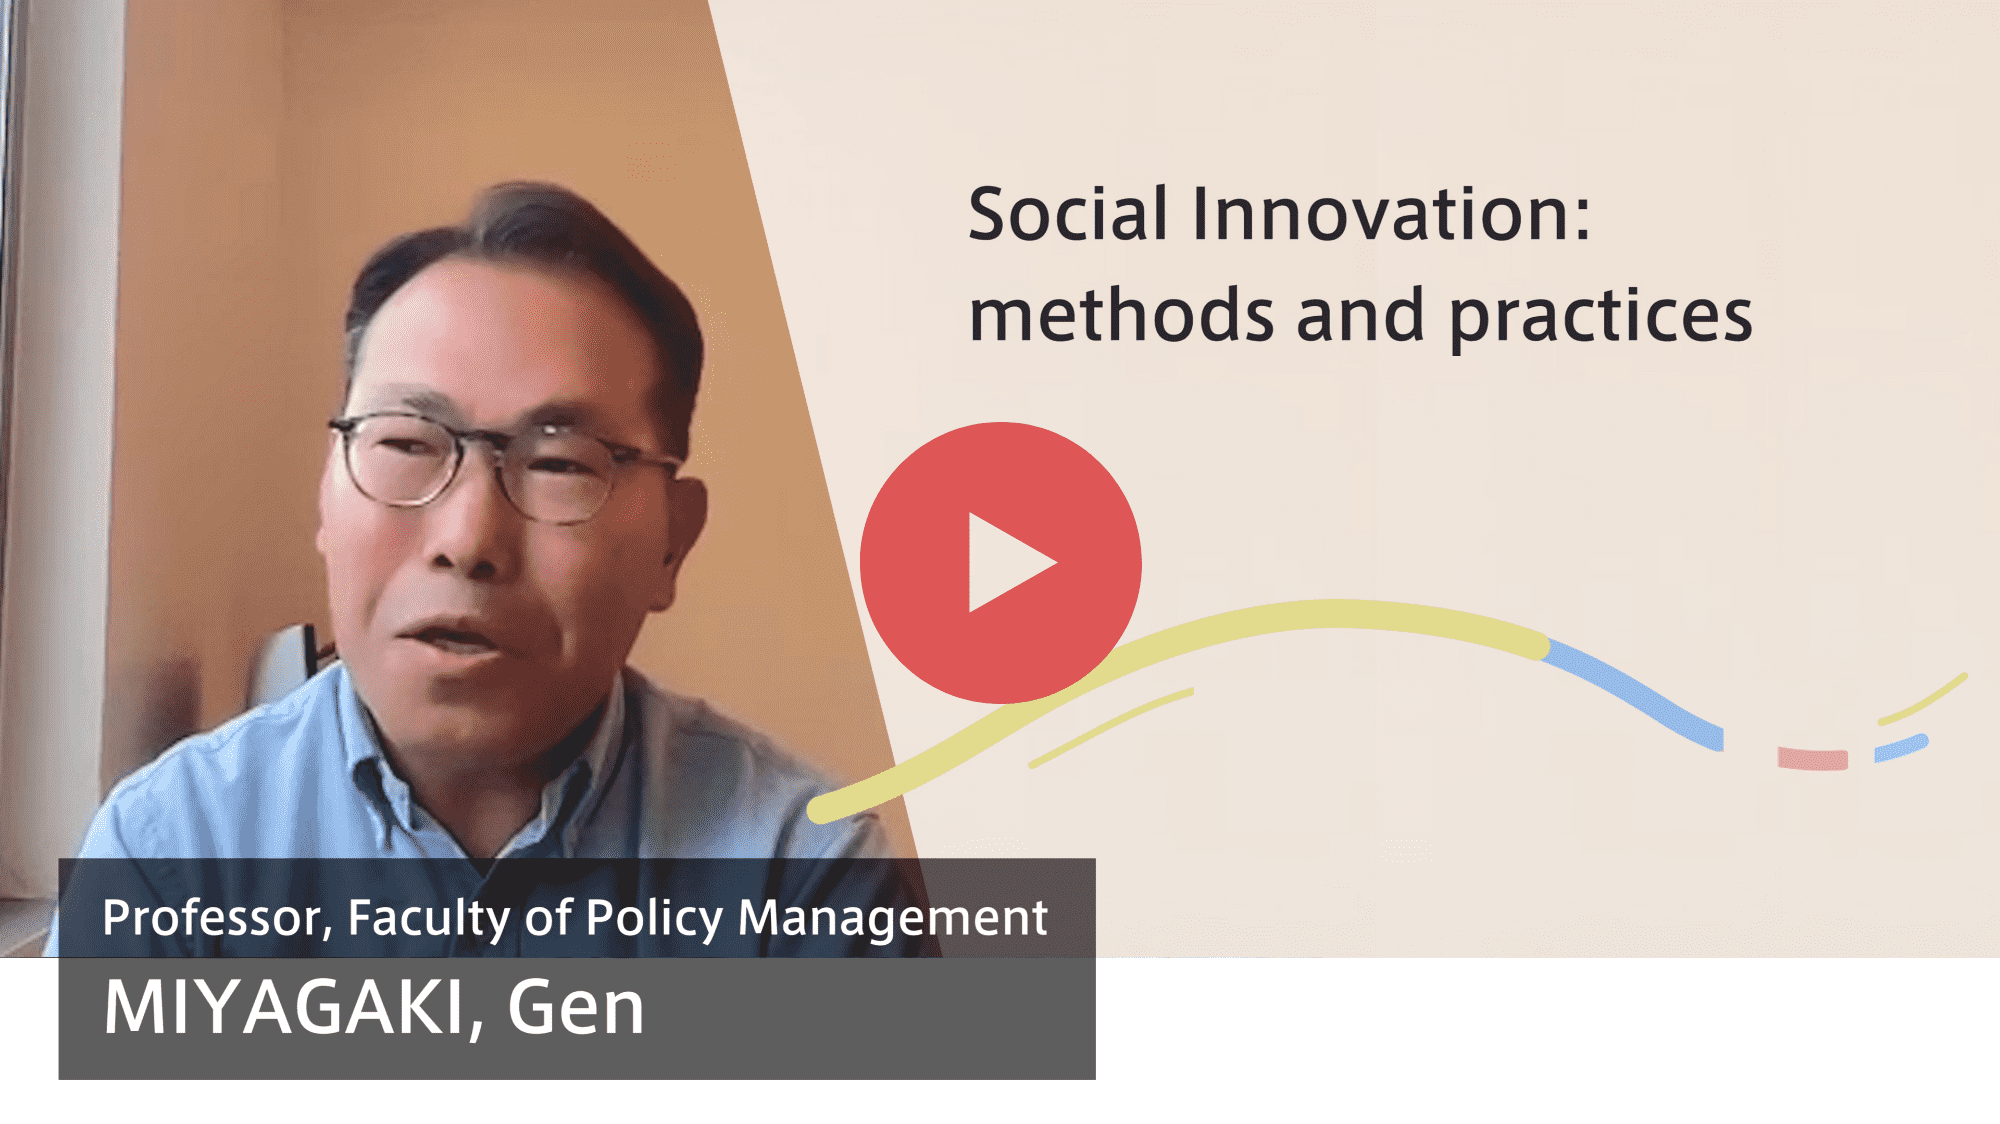 Social Innovation: methods and practices